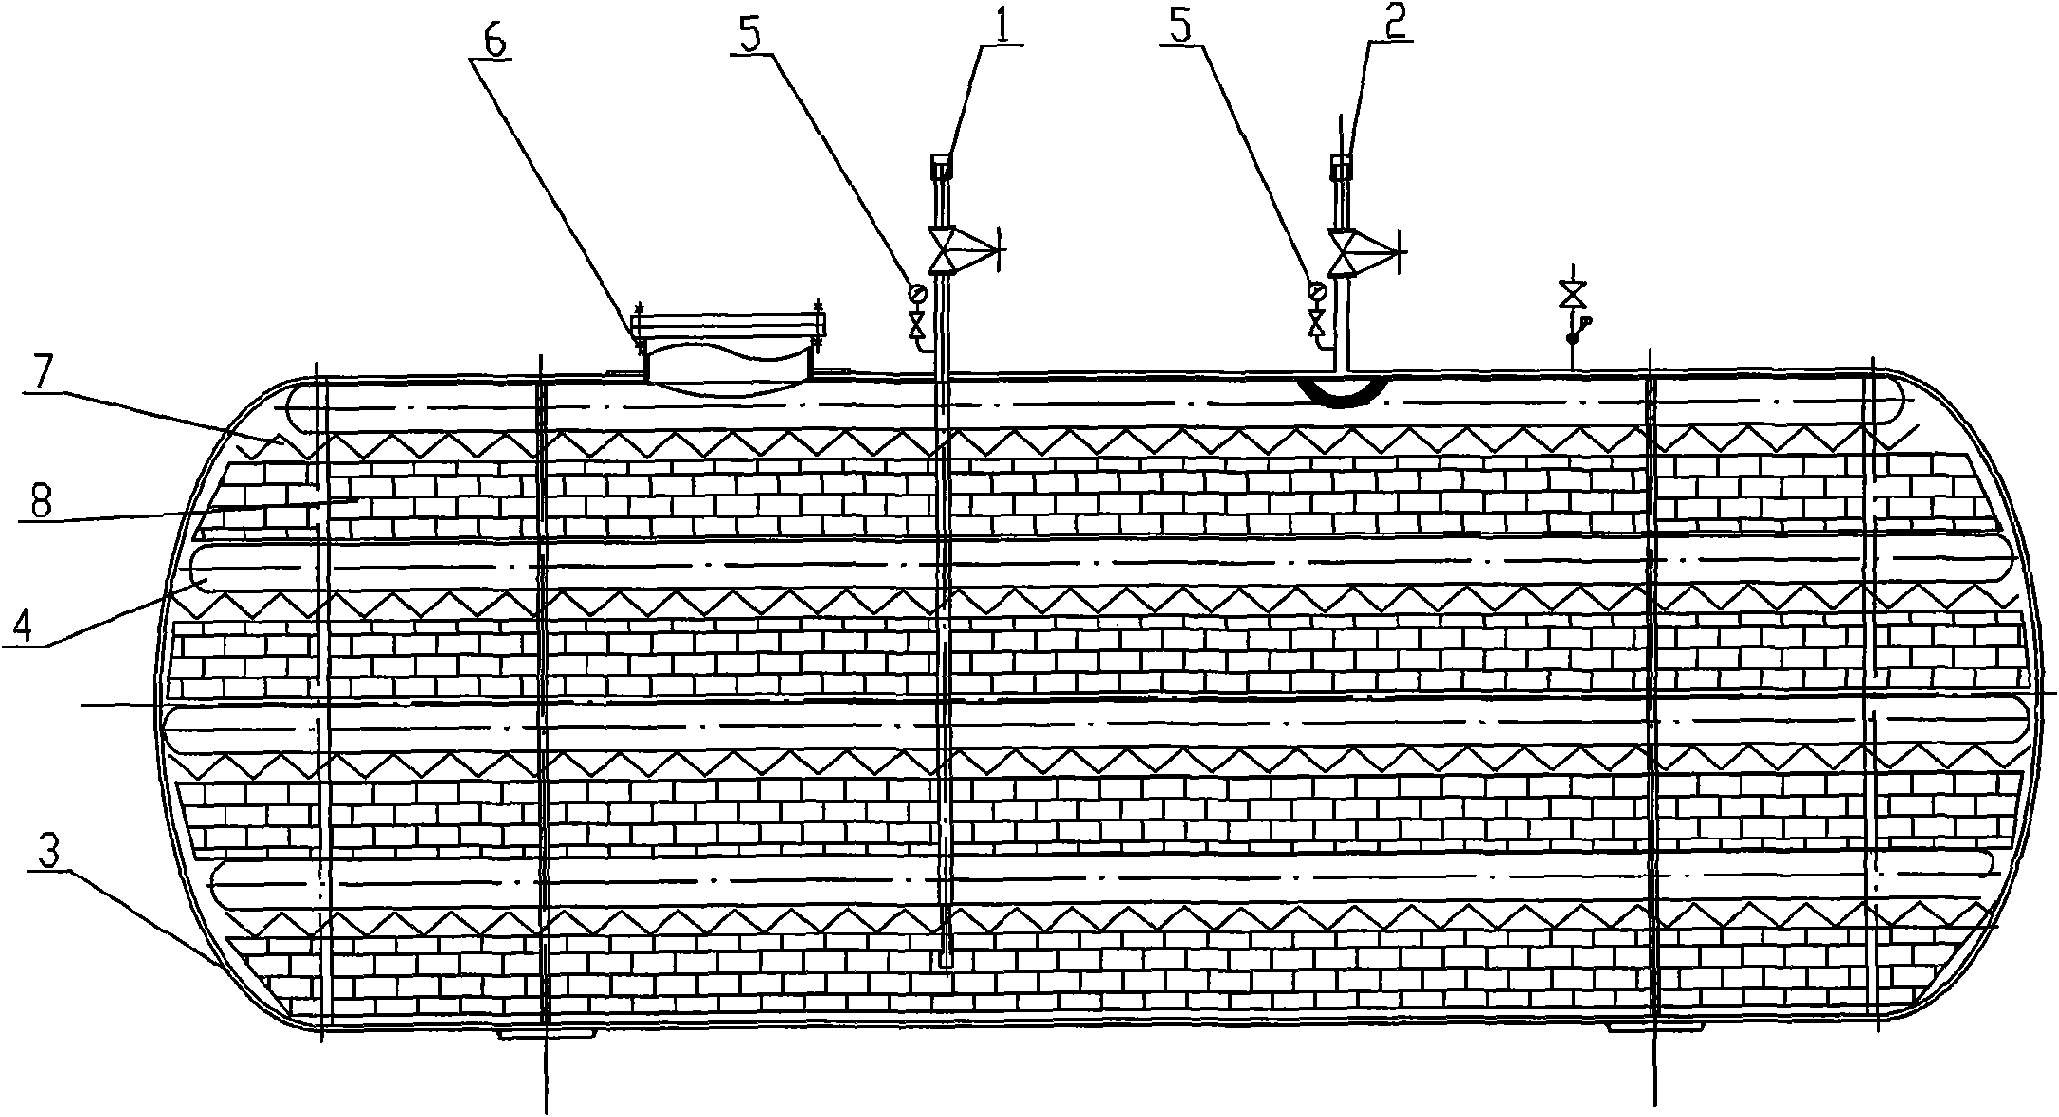 Heat accumulating type storage tank for absorbing natural gas